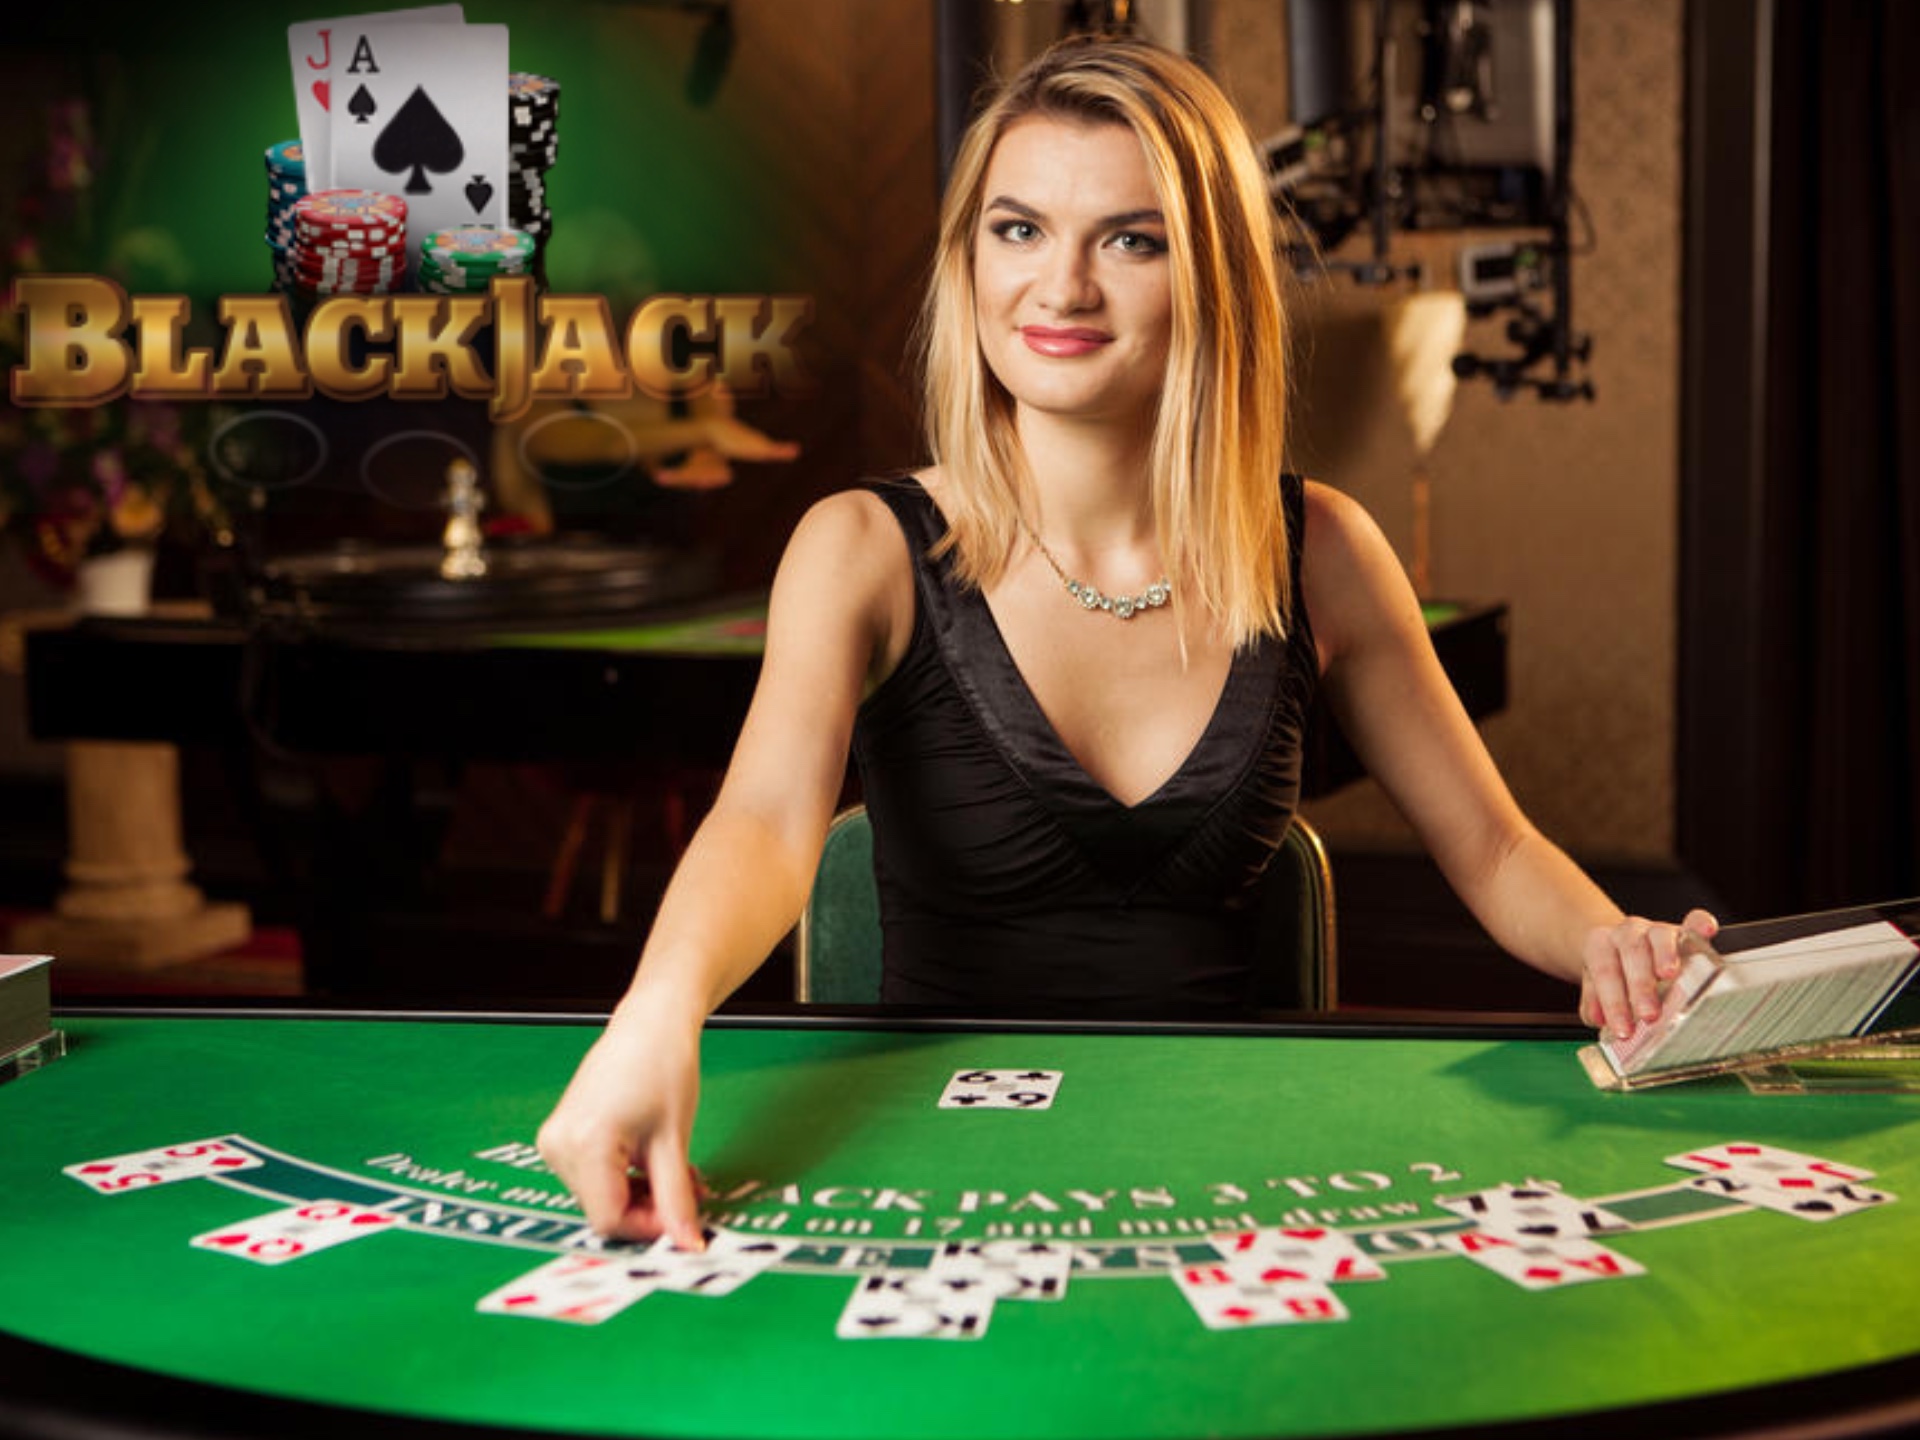 Blackjack is a well-known games that is available at every online casino in India.